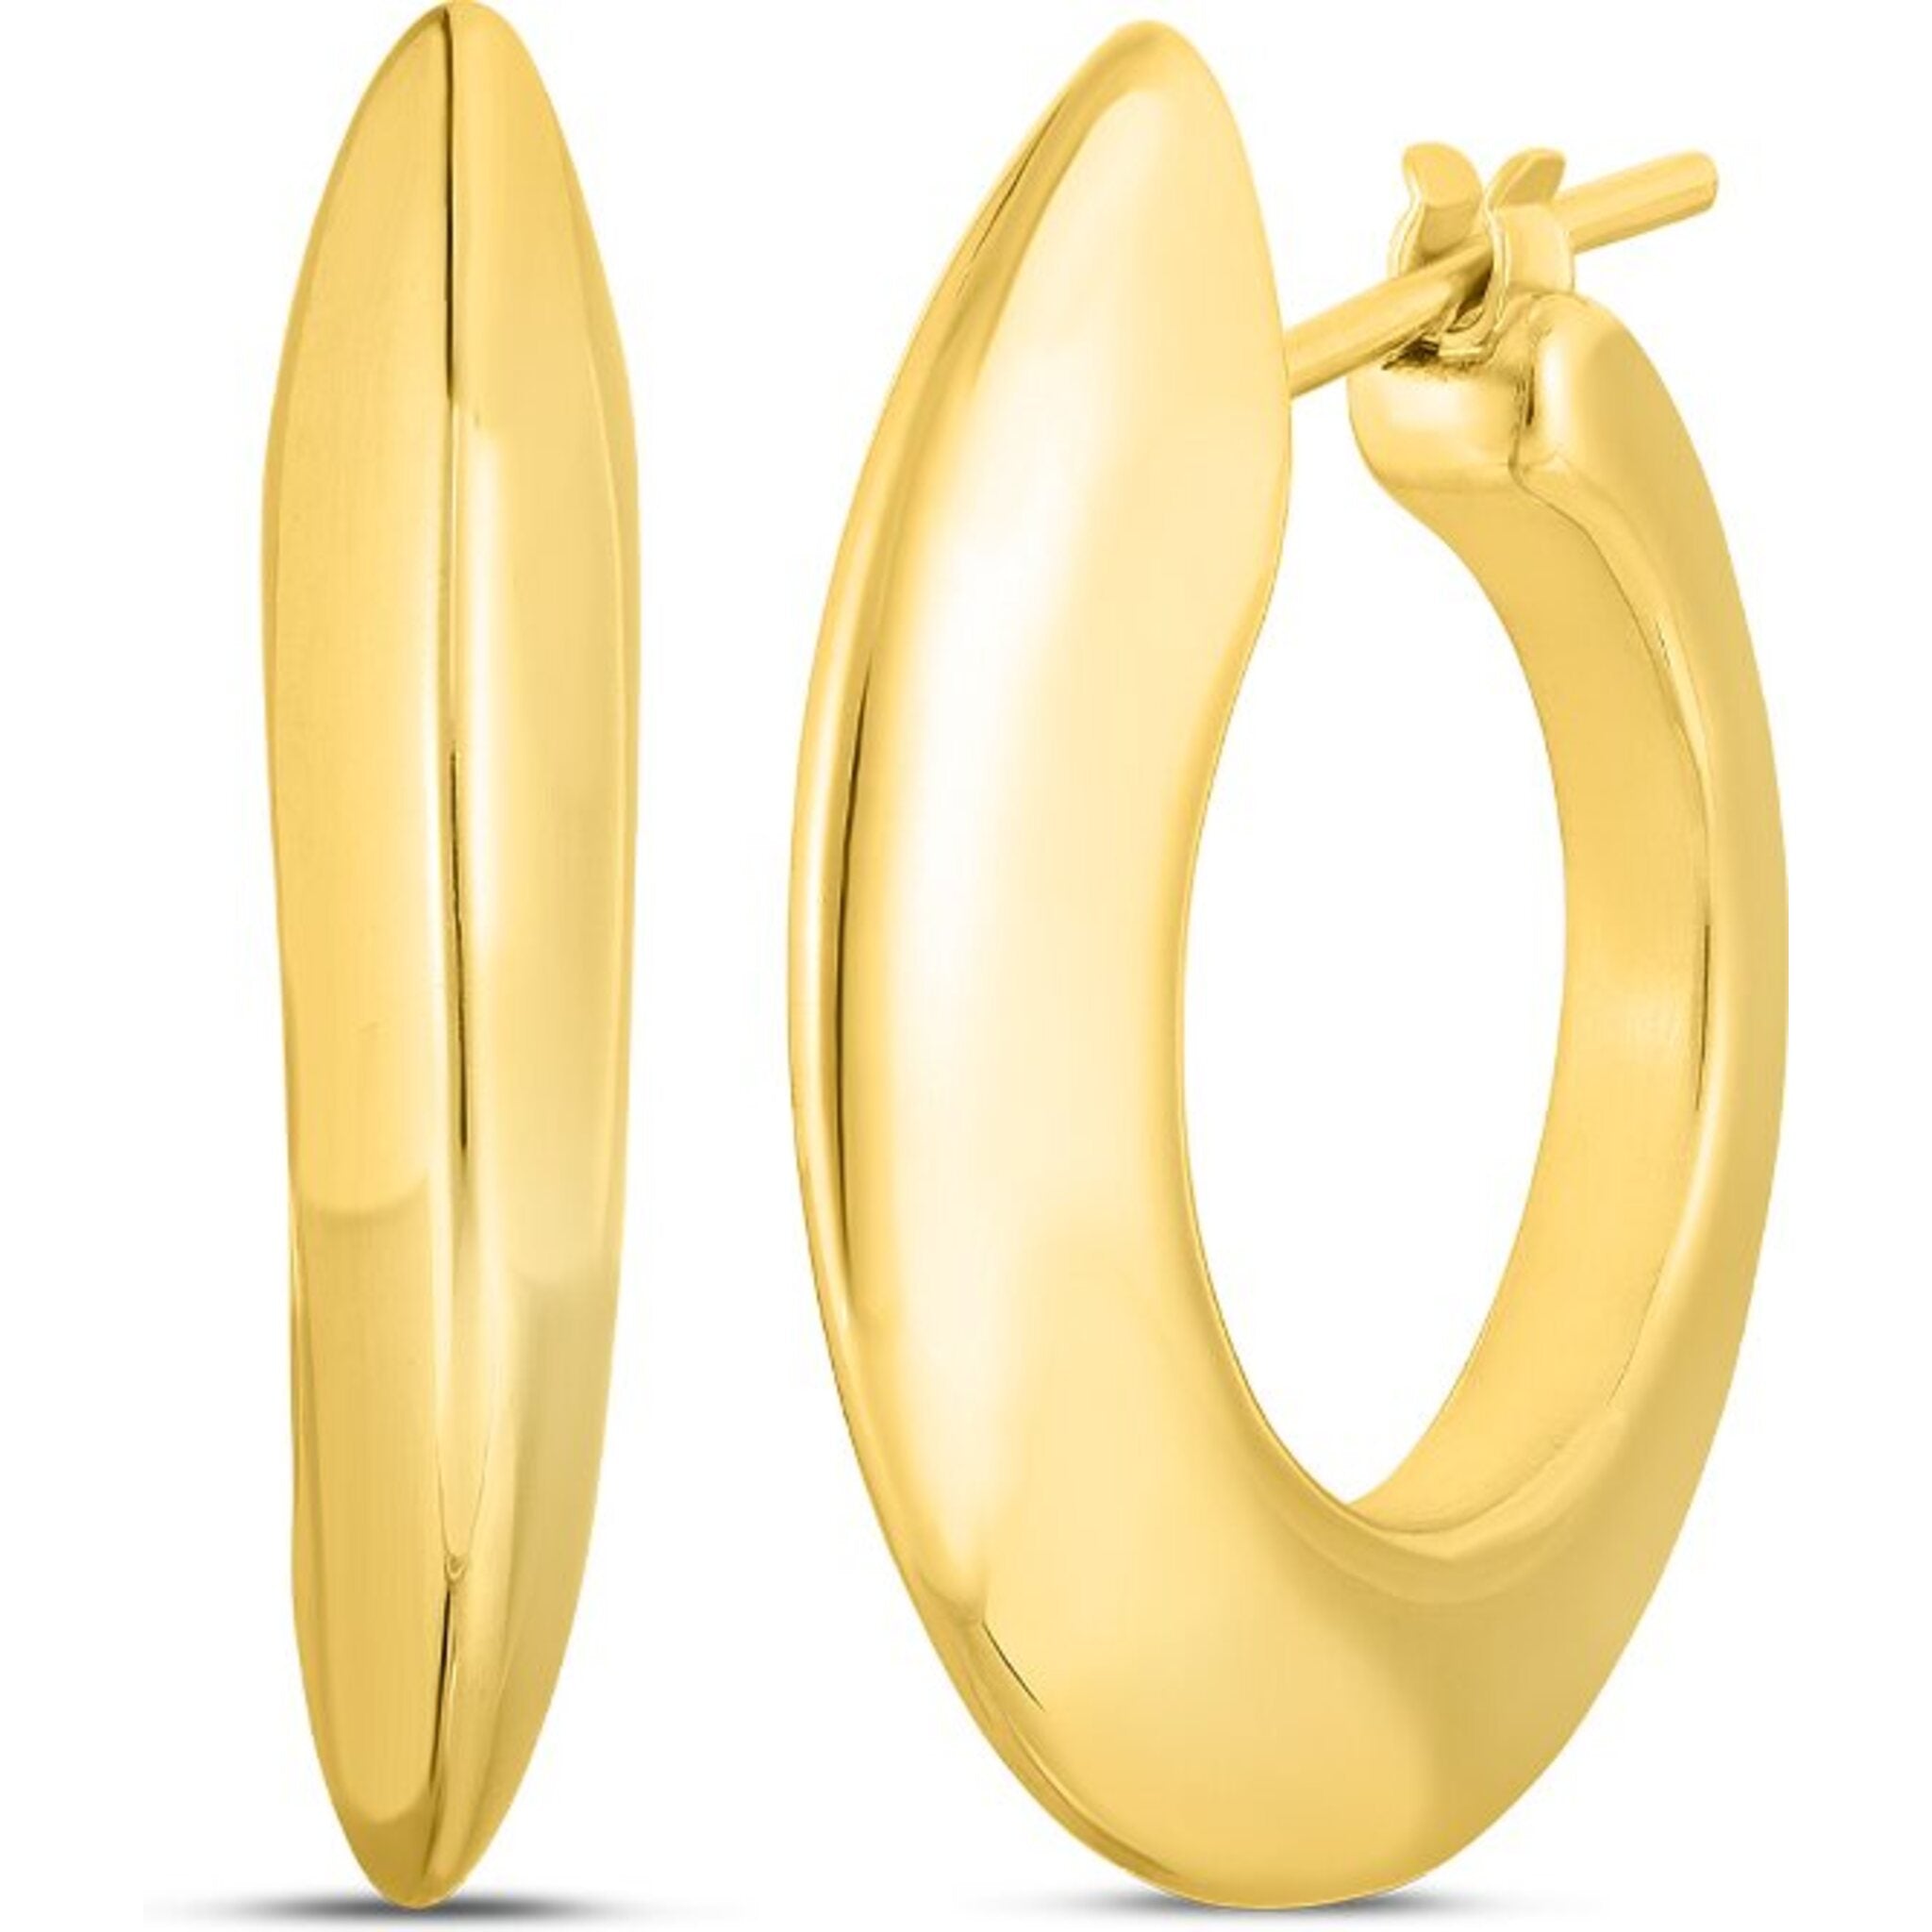 Roberto Coin 18Kt Gold Symphony New Barocco Hoop Earrings 7771361AYER0 -  Packouz Jewelers